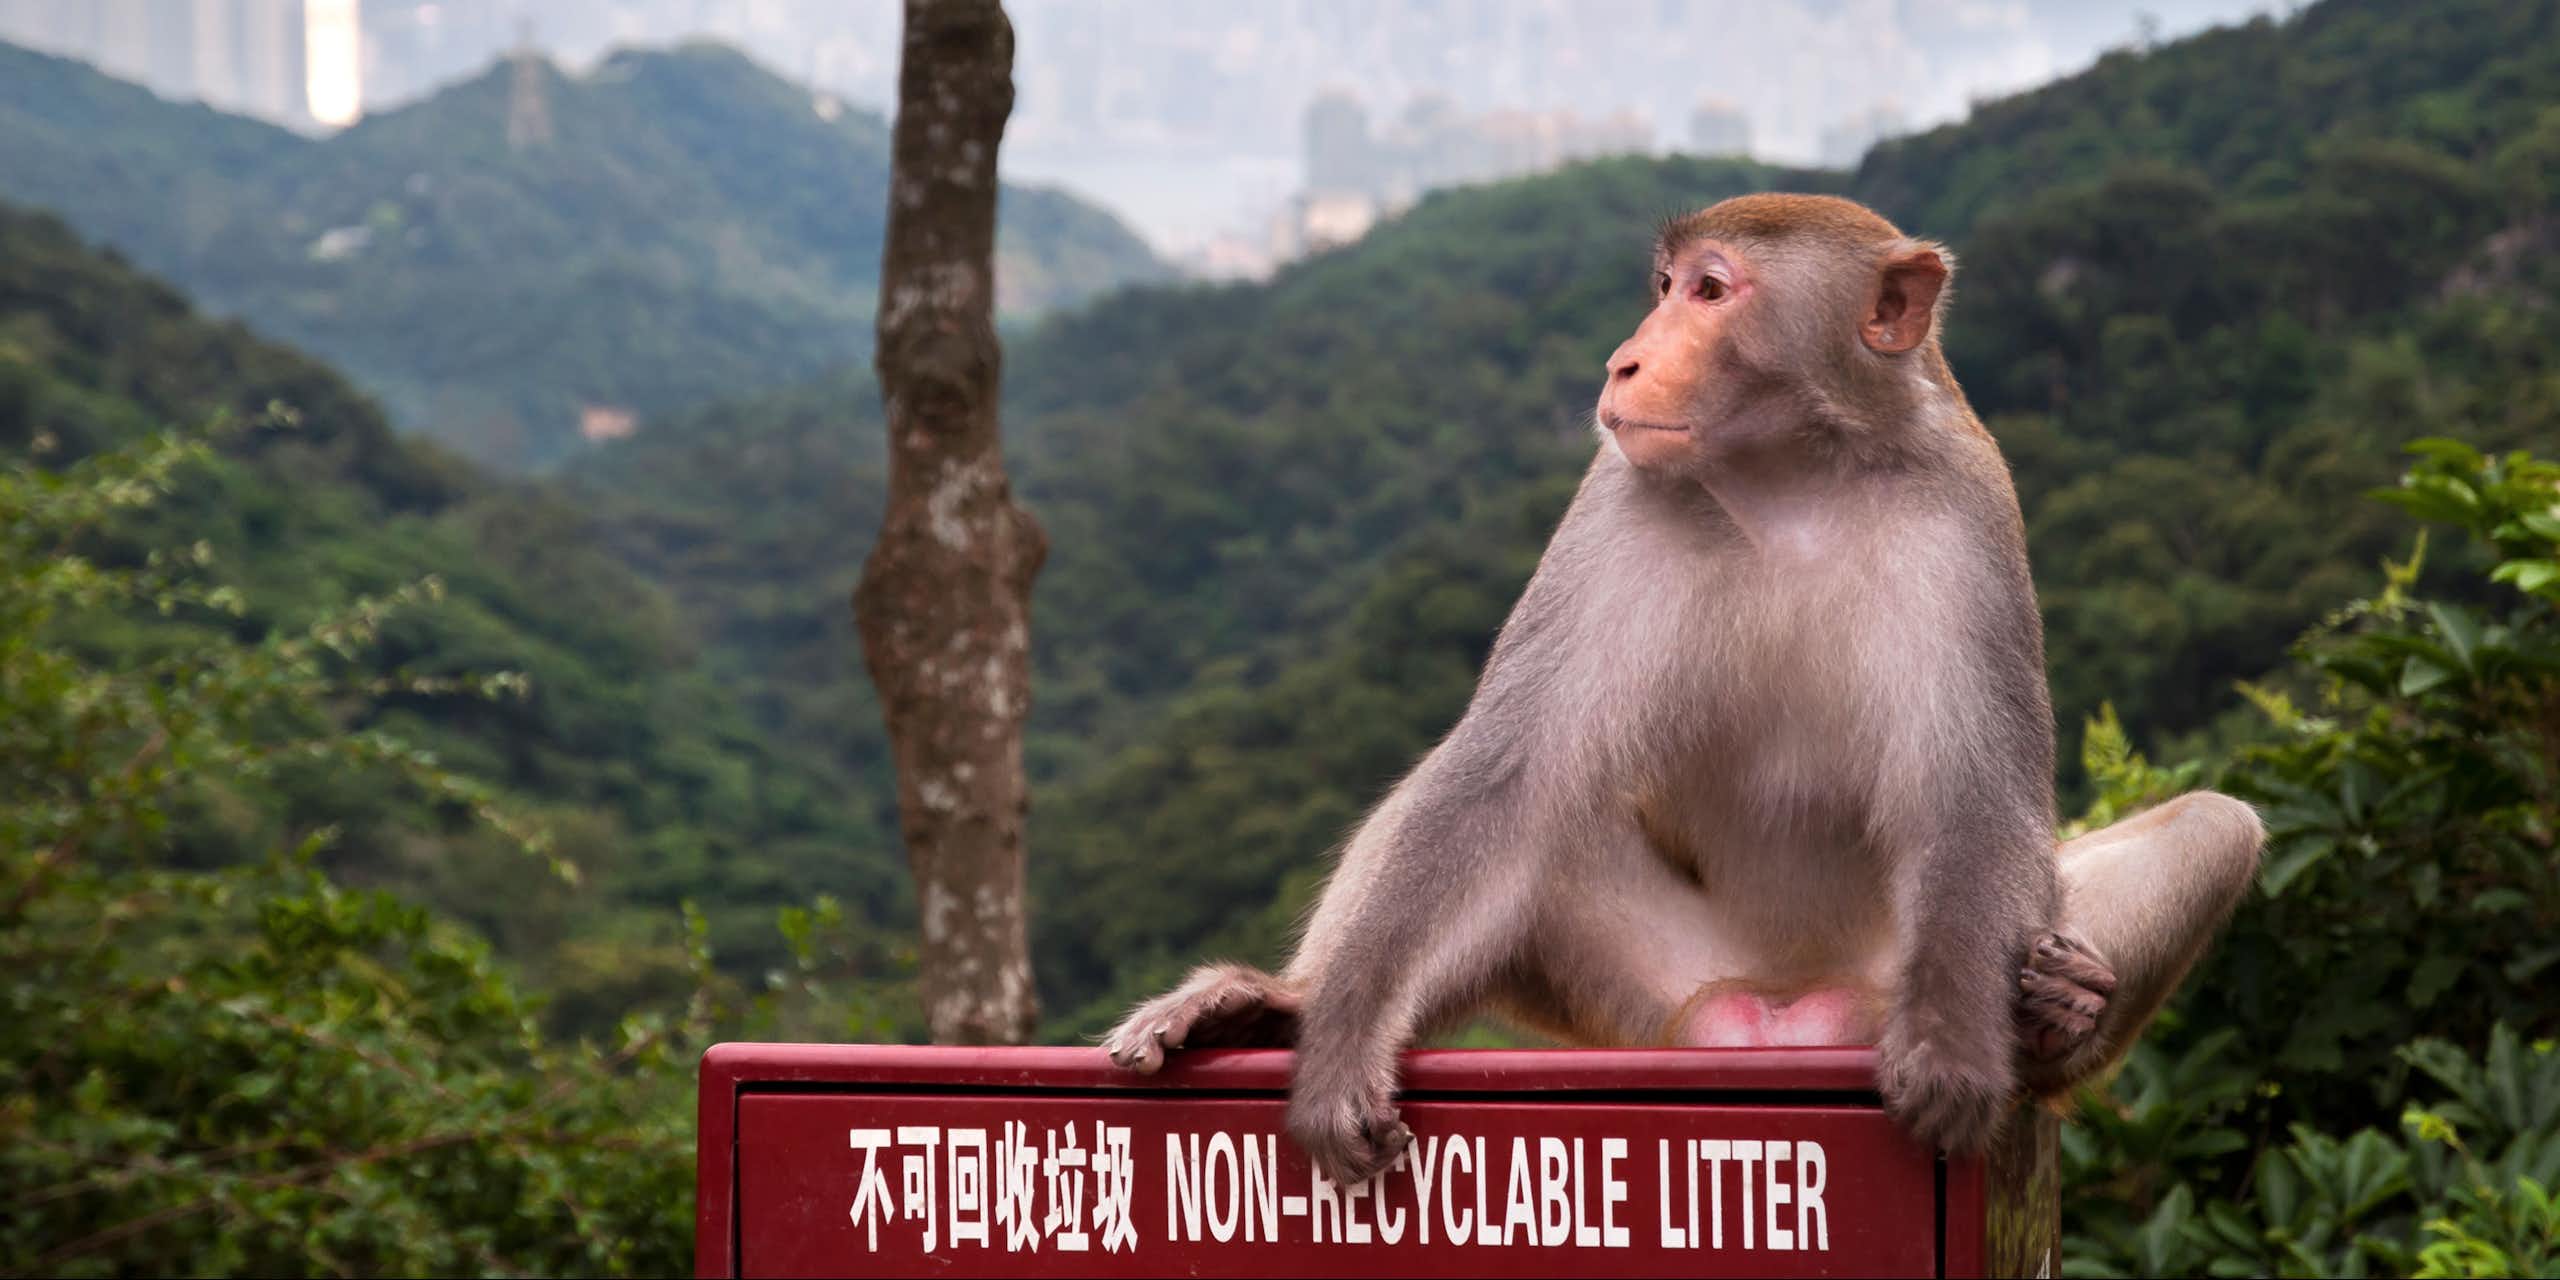 A rhesus monkey sitting on a red sign in Hong Kong